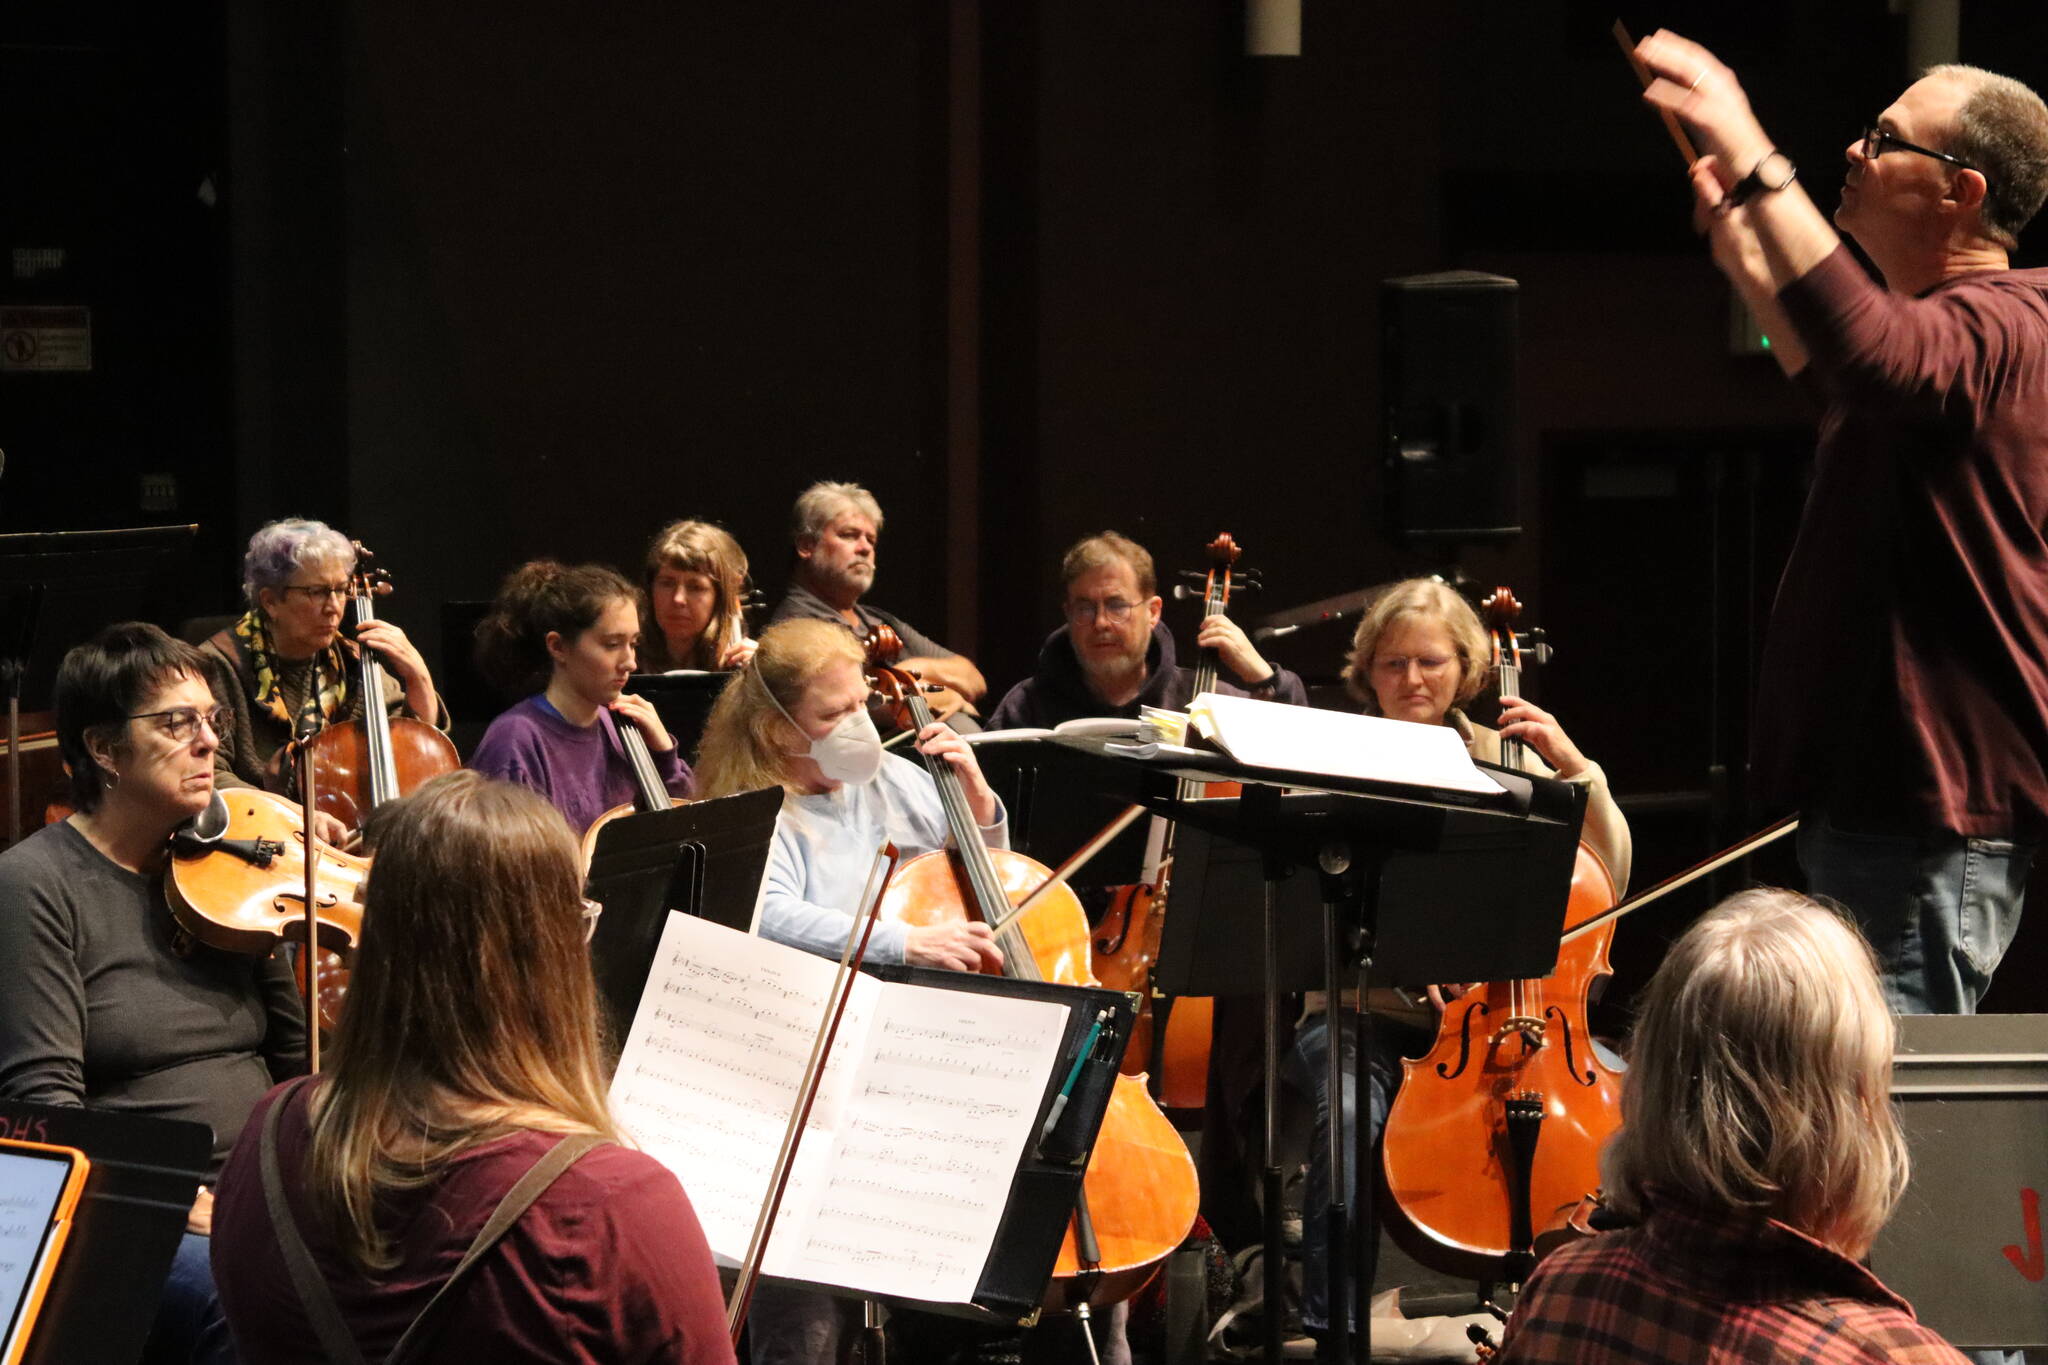 Christopher Koch, musical director for Juneau Symphony, faces members of the viola and cello sections during rehearsals of “Candide” Tuesday evening at Juneau-Douglas High School: Yadaa.at Kalé. Performances at JDHS are scheduled Saturday at 7:30 p.m. and Sunday at 3 p.m. (Meredith Jordan/ Juneau Empire)